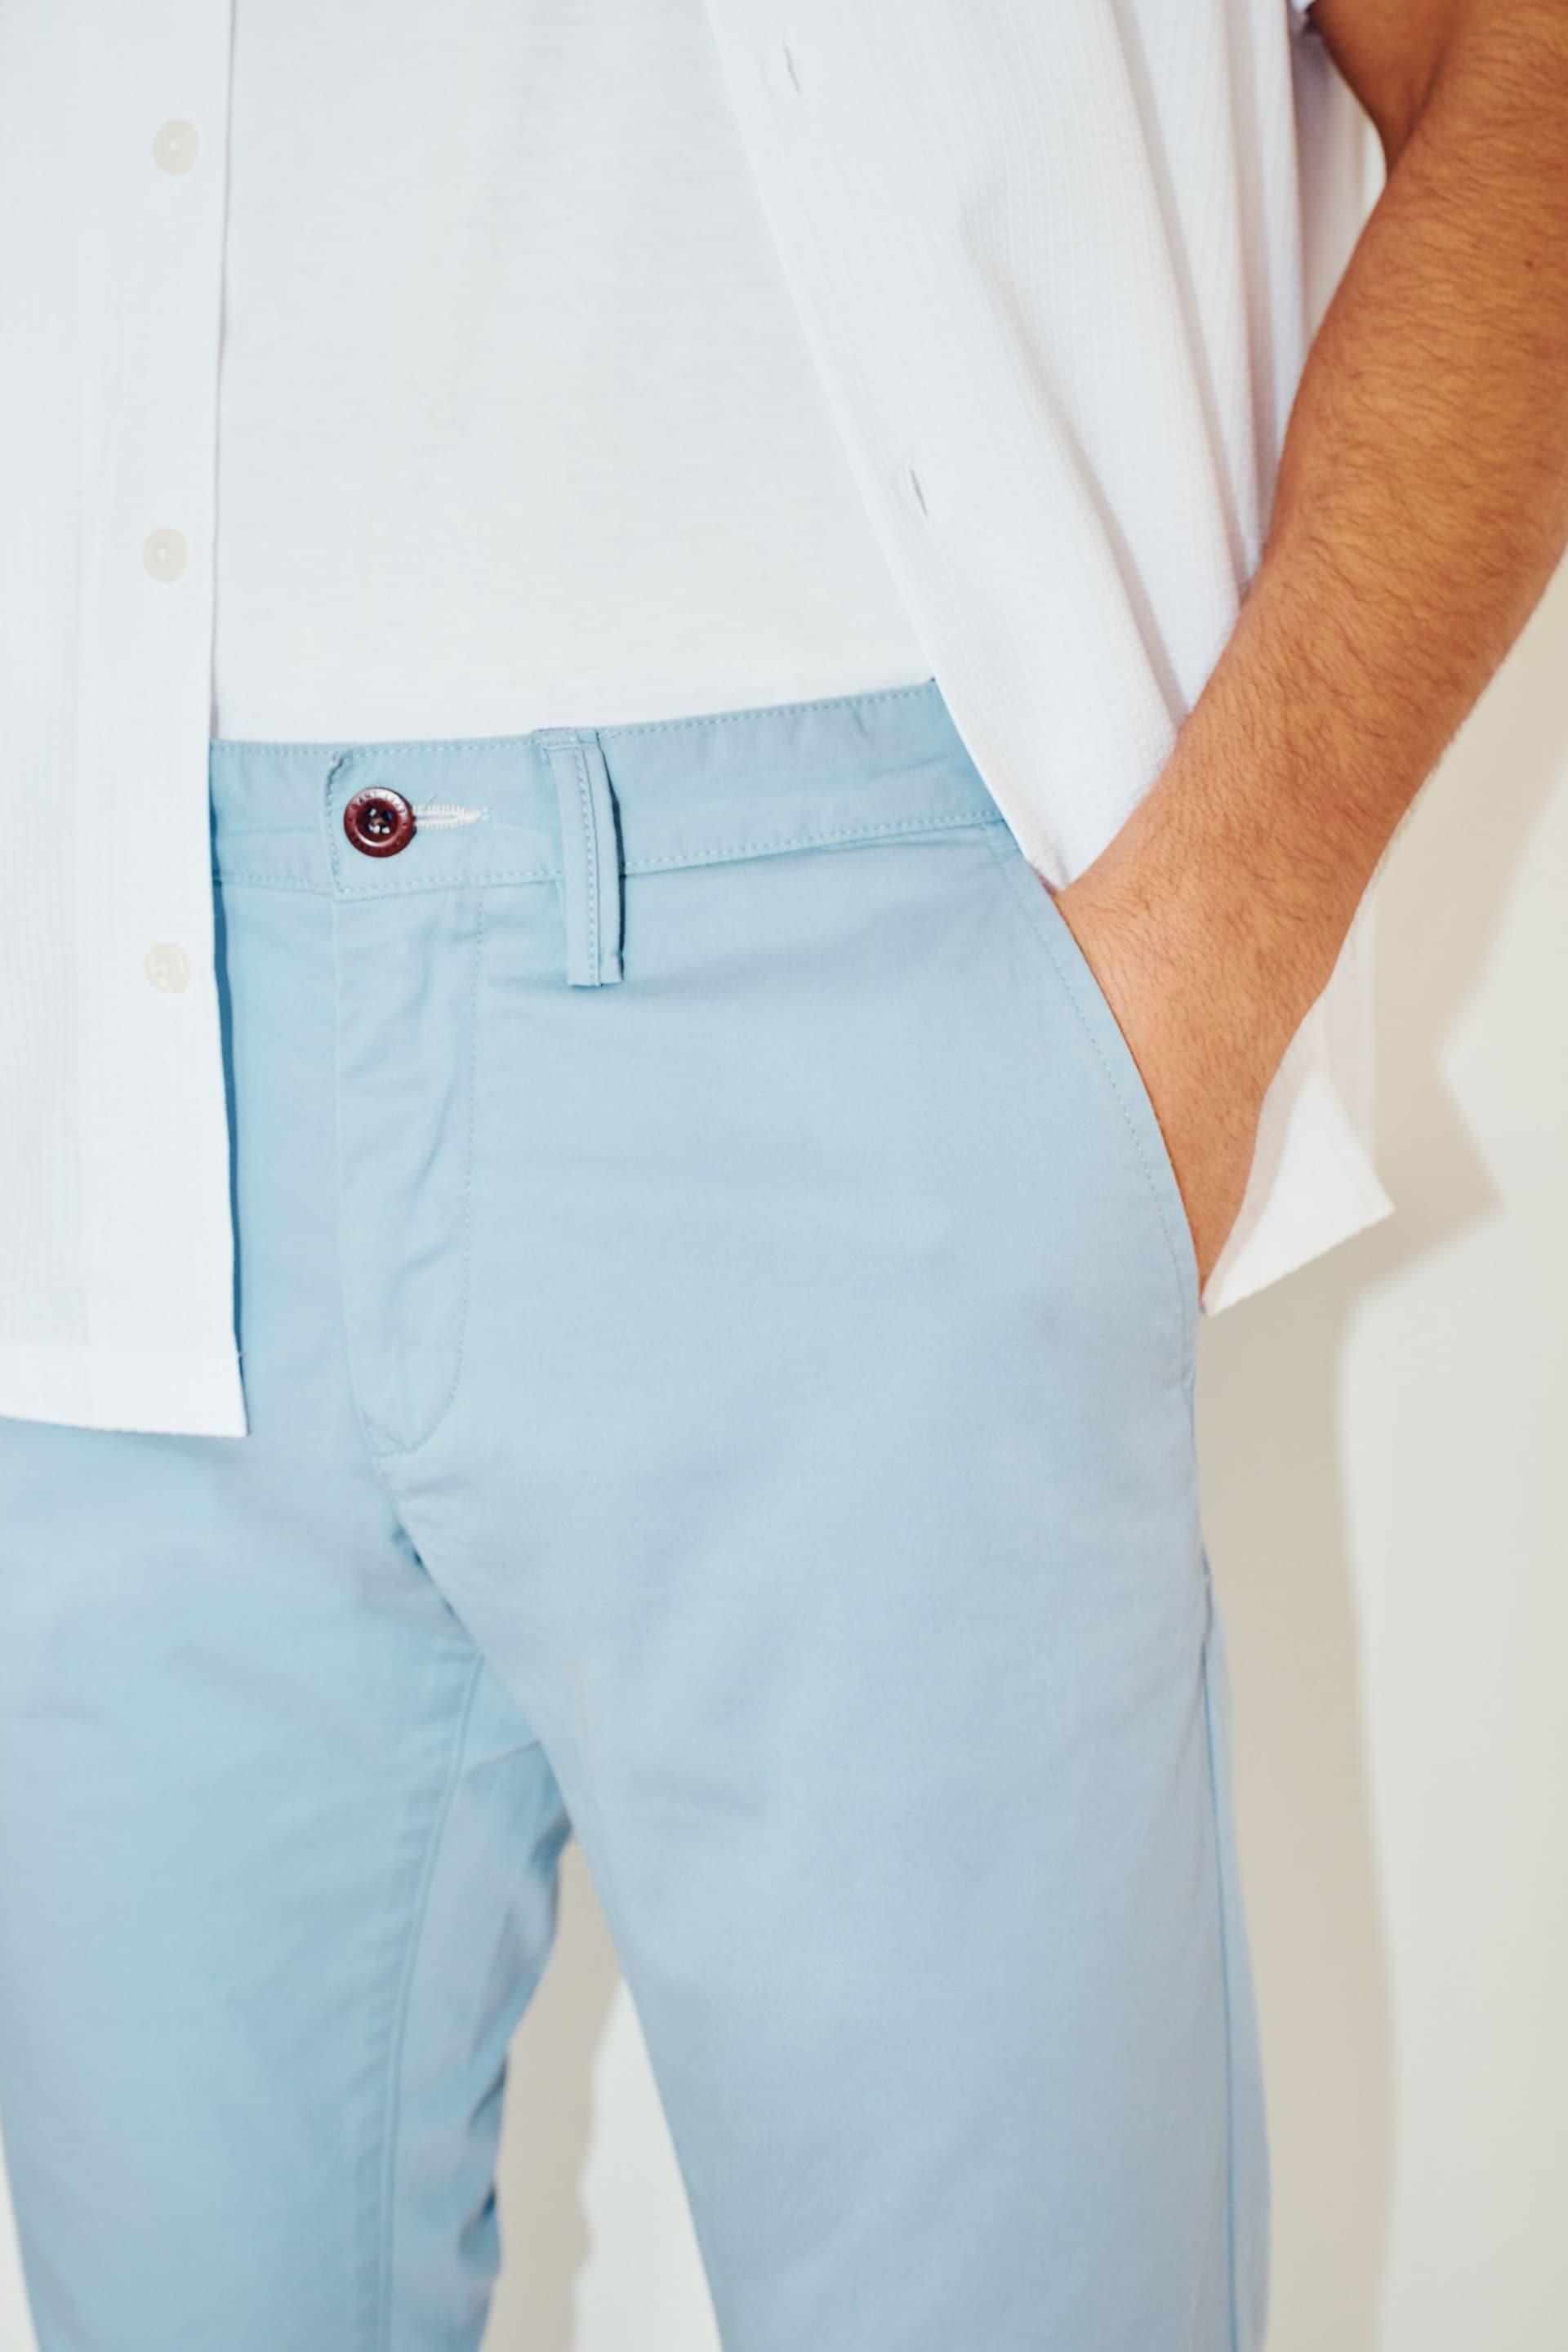 GANT Blue Slim Fit Cotton Twill Chino Trousers - Image 4 of 5